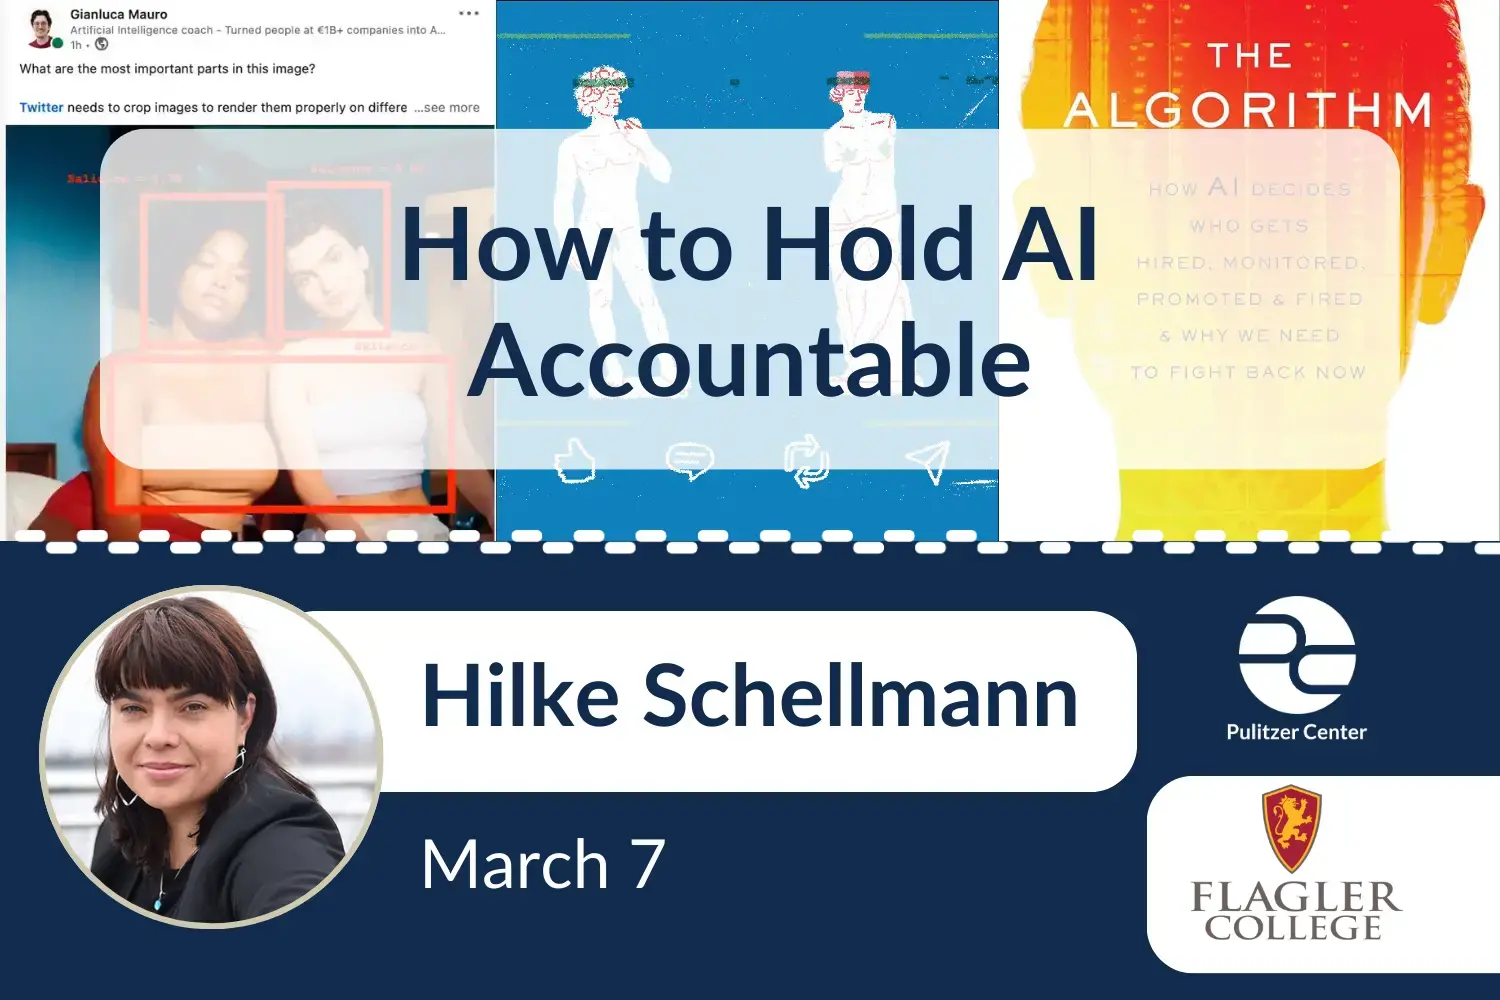 How to Hold AI Accountable event with Hilke Schellmann at Flagler College